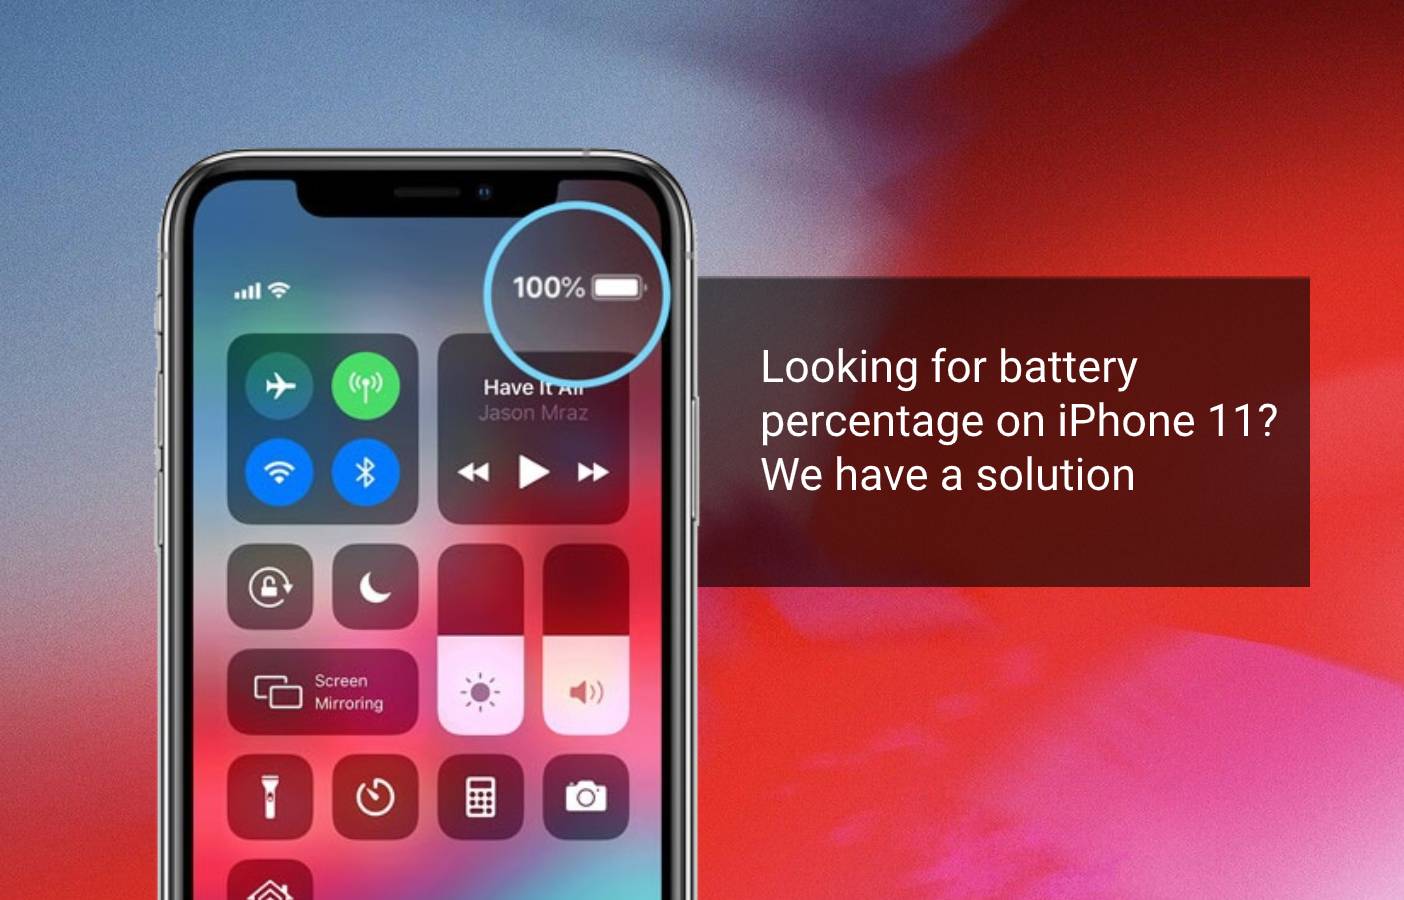 How To Show Battery Percentage on iPhone 11?